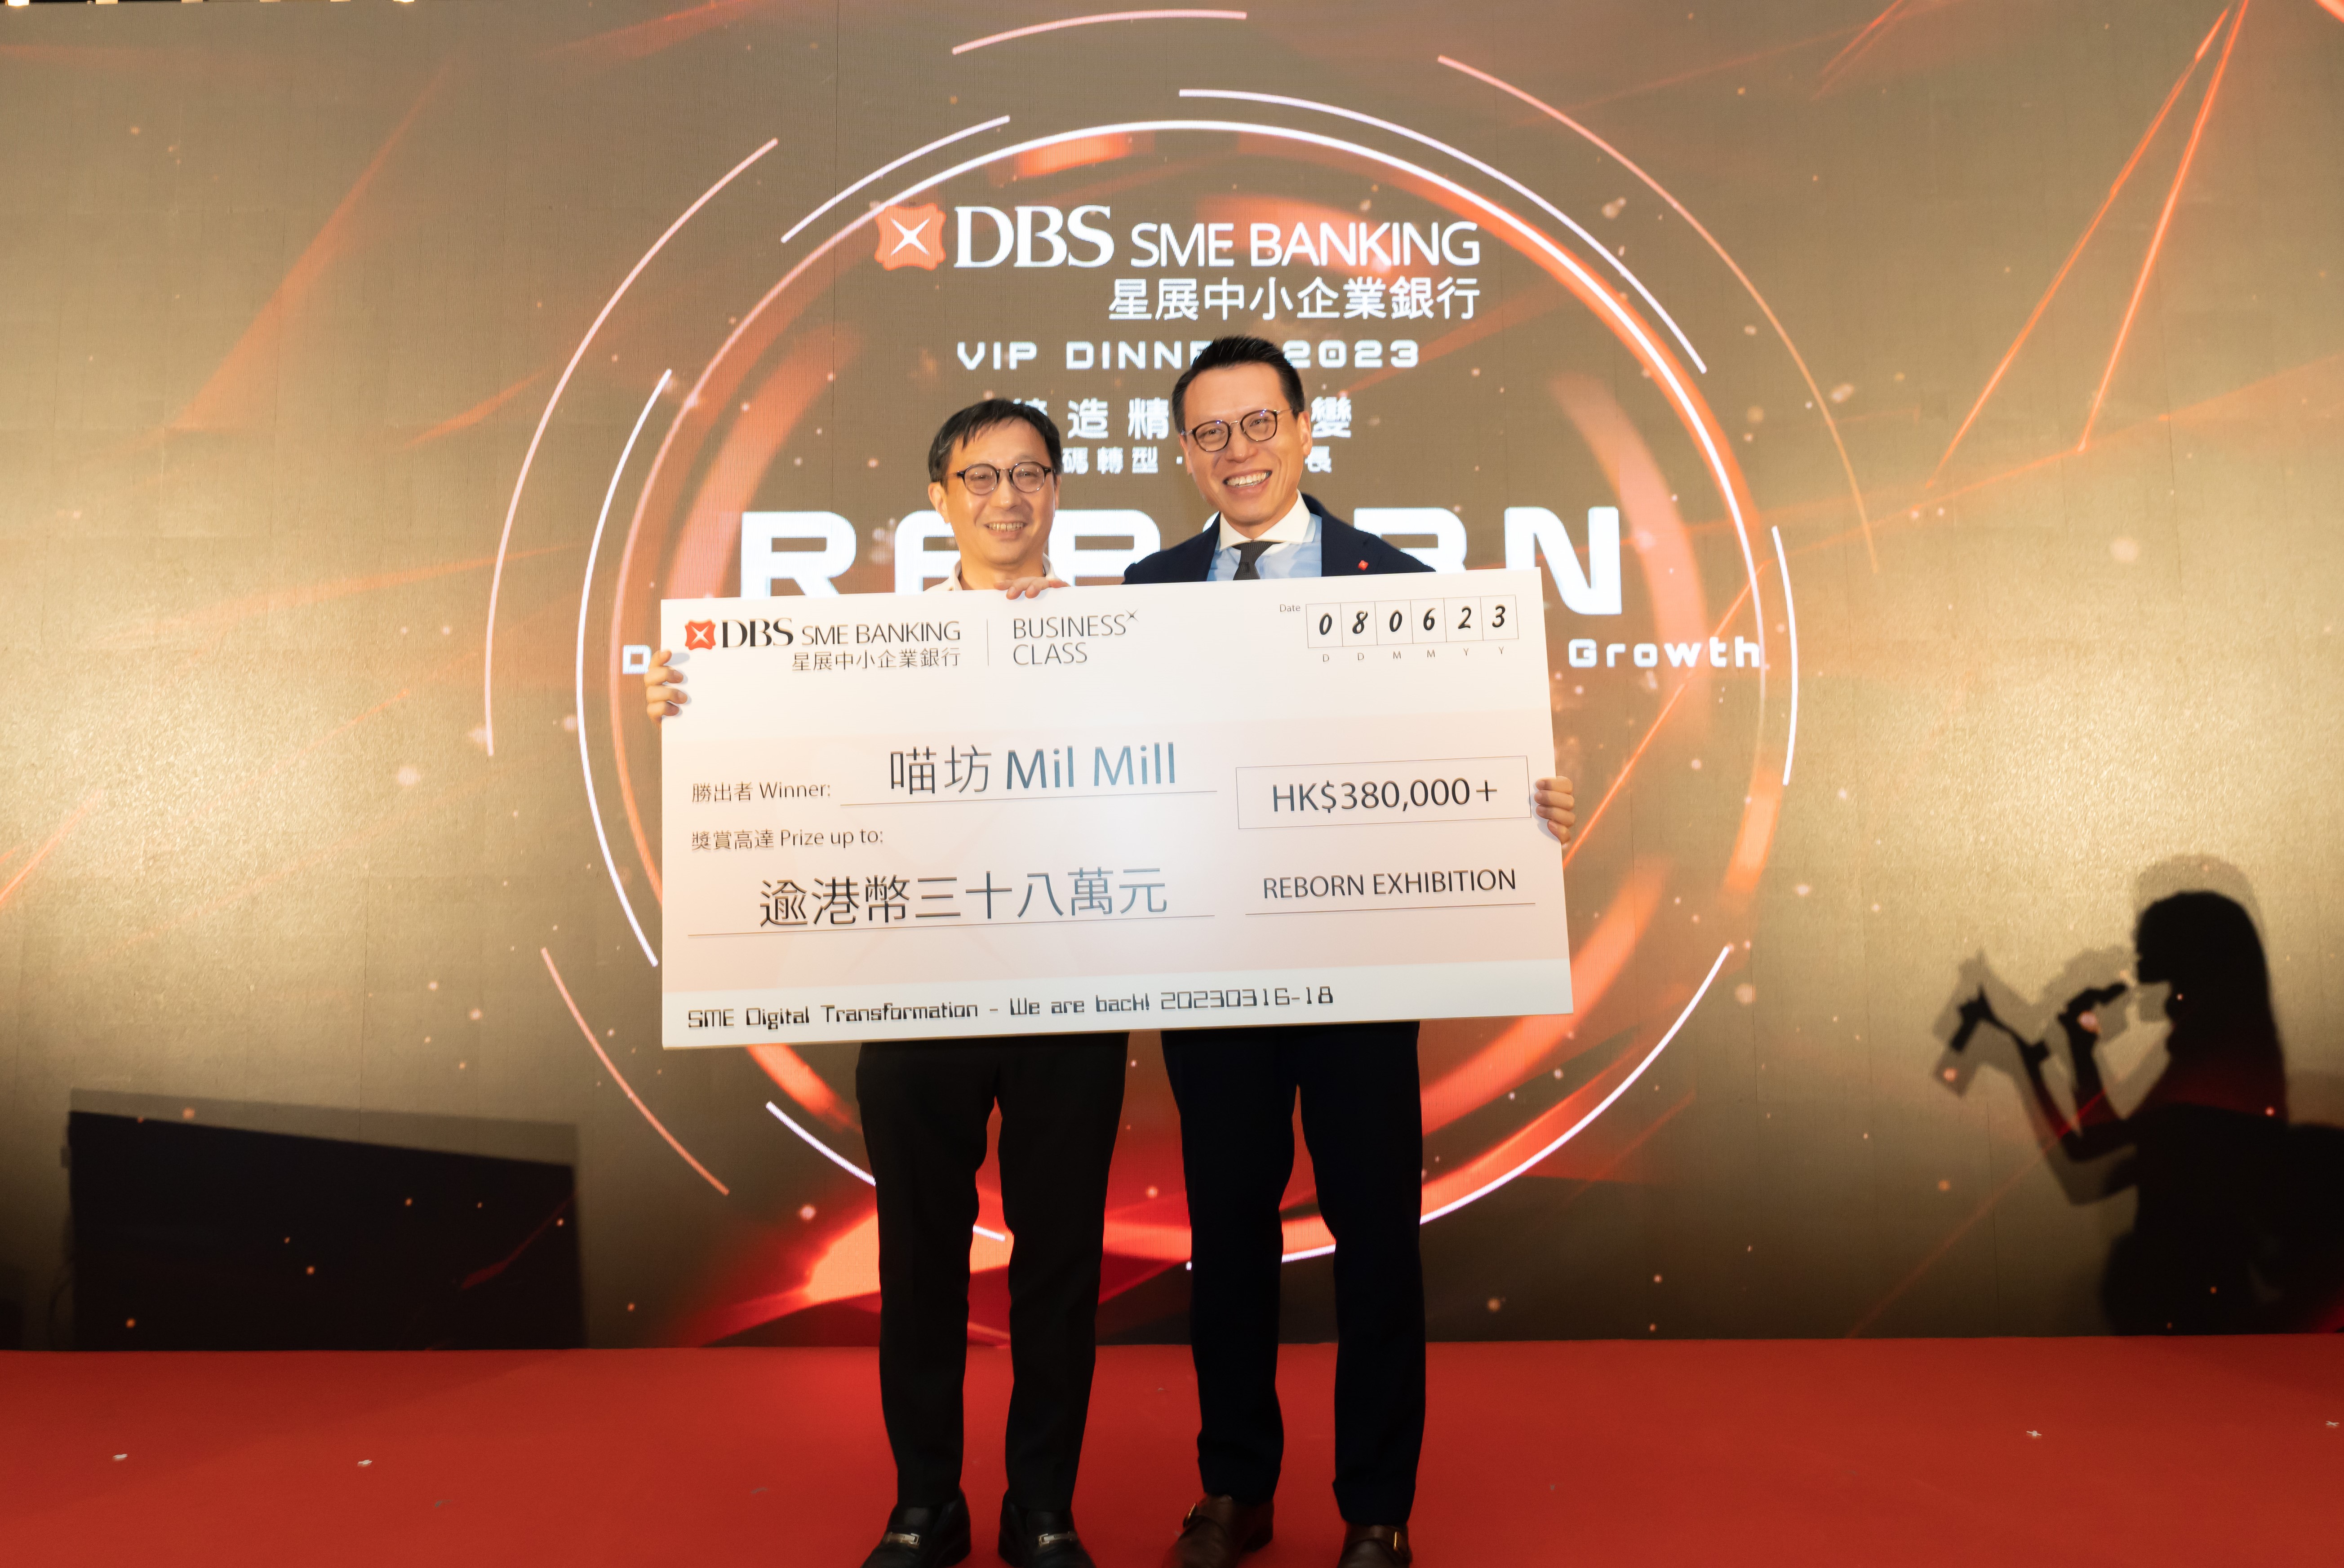 Mil Mill is voted by the public as the top SME from the DBS BusinessClass Reborn Exhibition  We are Back: Digital Transformation of SMEs digital art exhibition held in March and is entitled to a total prize of over HKD $380,000 from DBS Hong Kong.